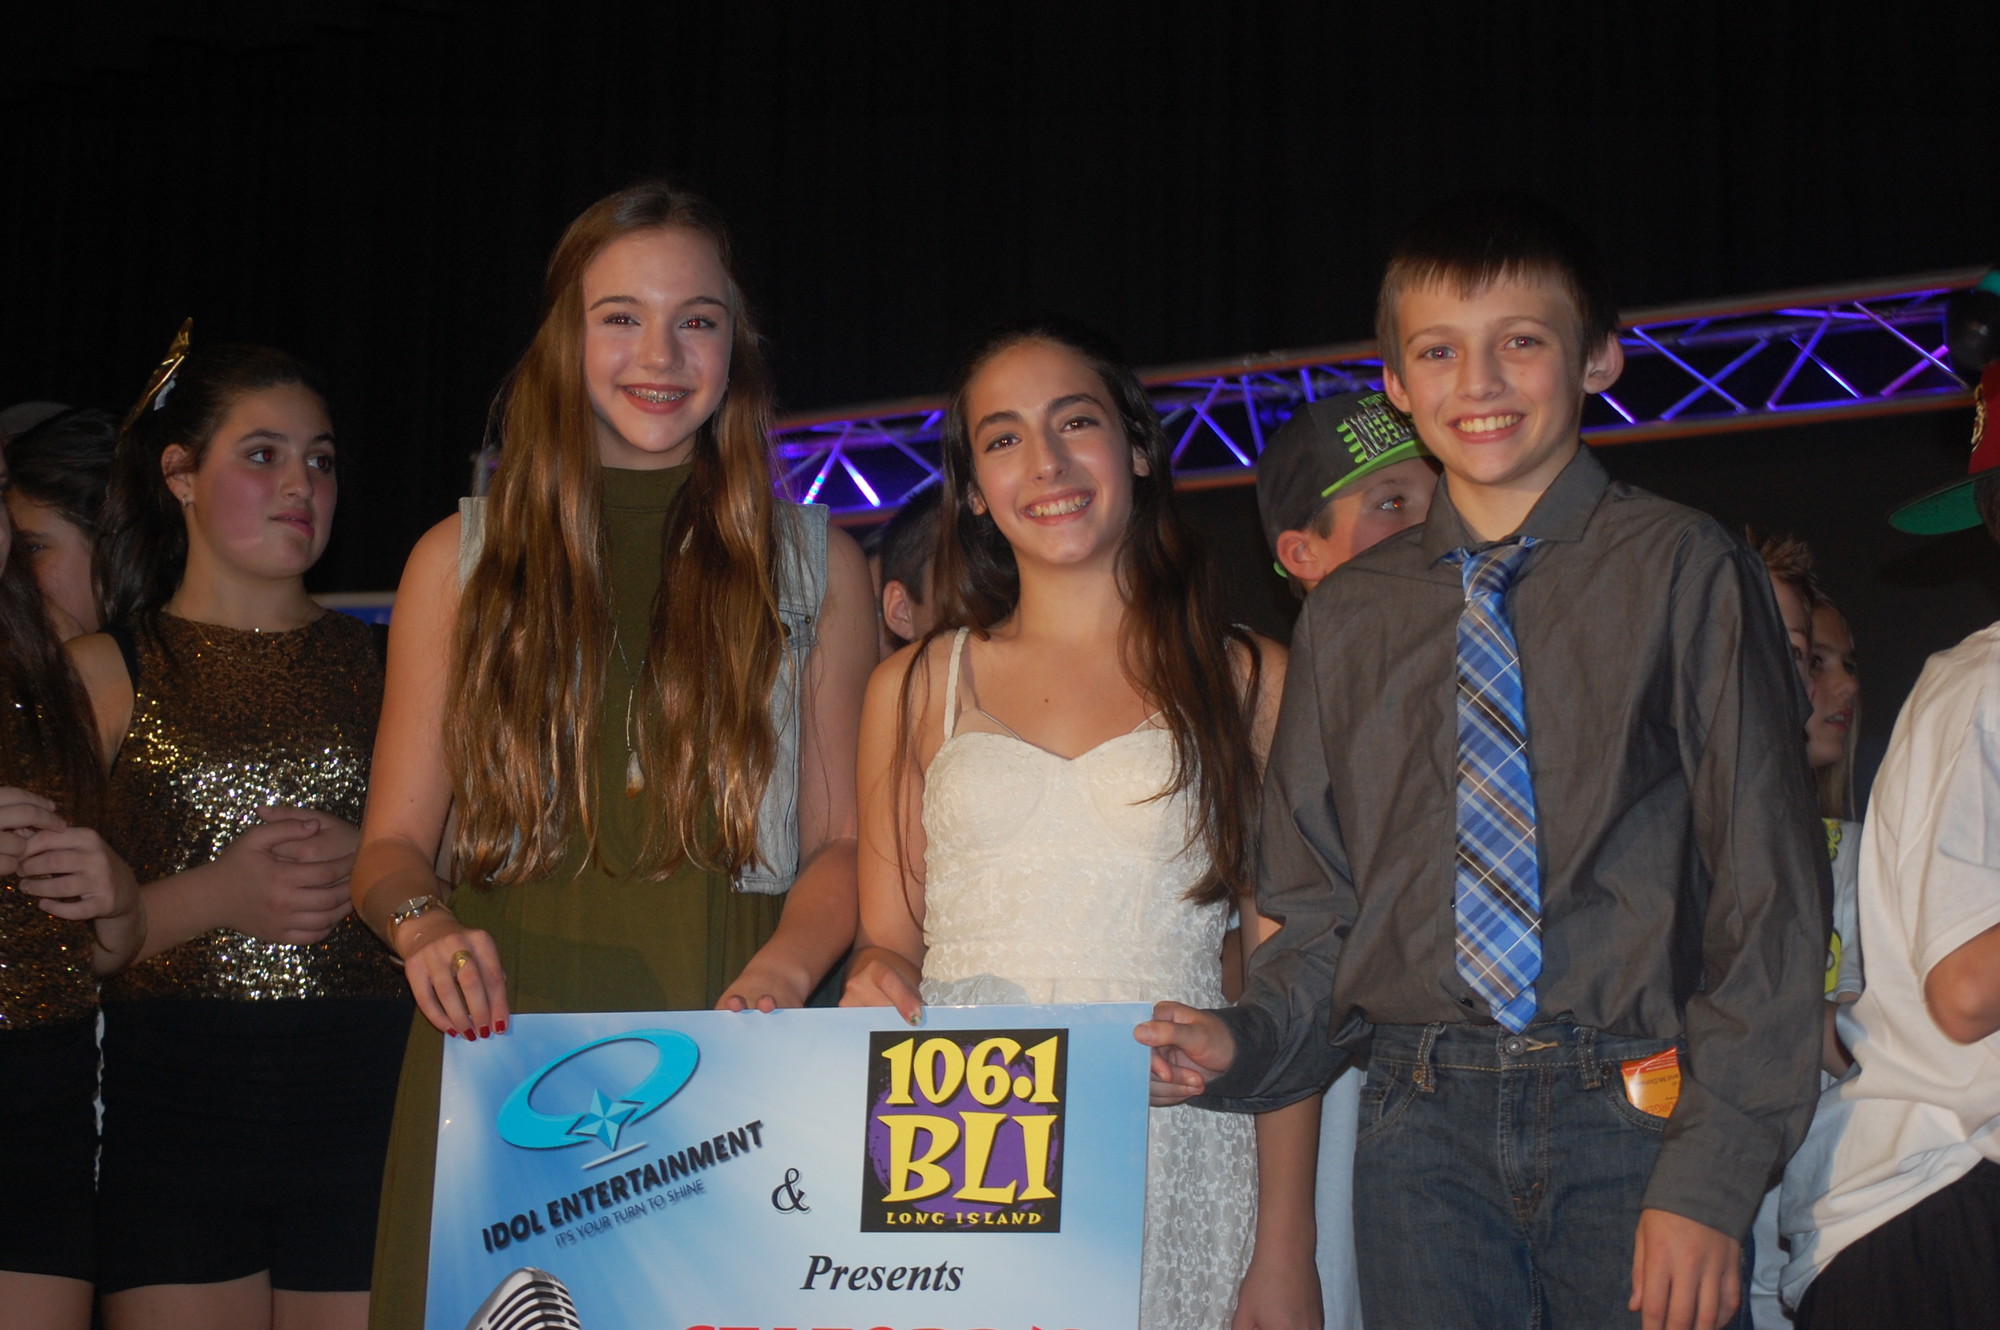 Winners of Seaford’s Got Talent, from left, were Carly Corsitto (first place), Giana Cesario (third), and Liam McDonald (second).